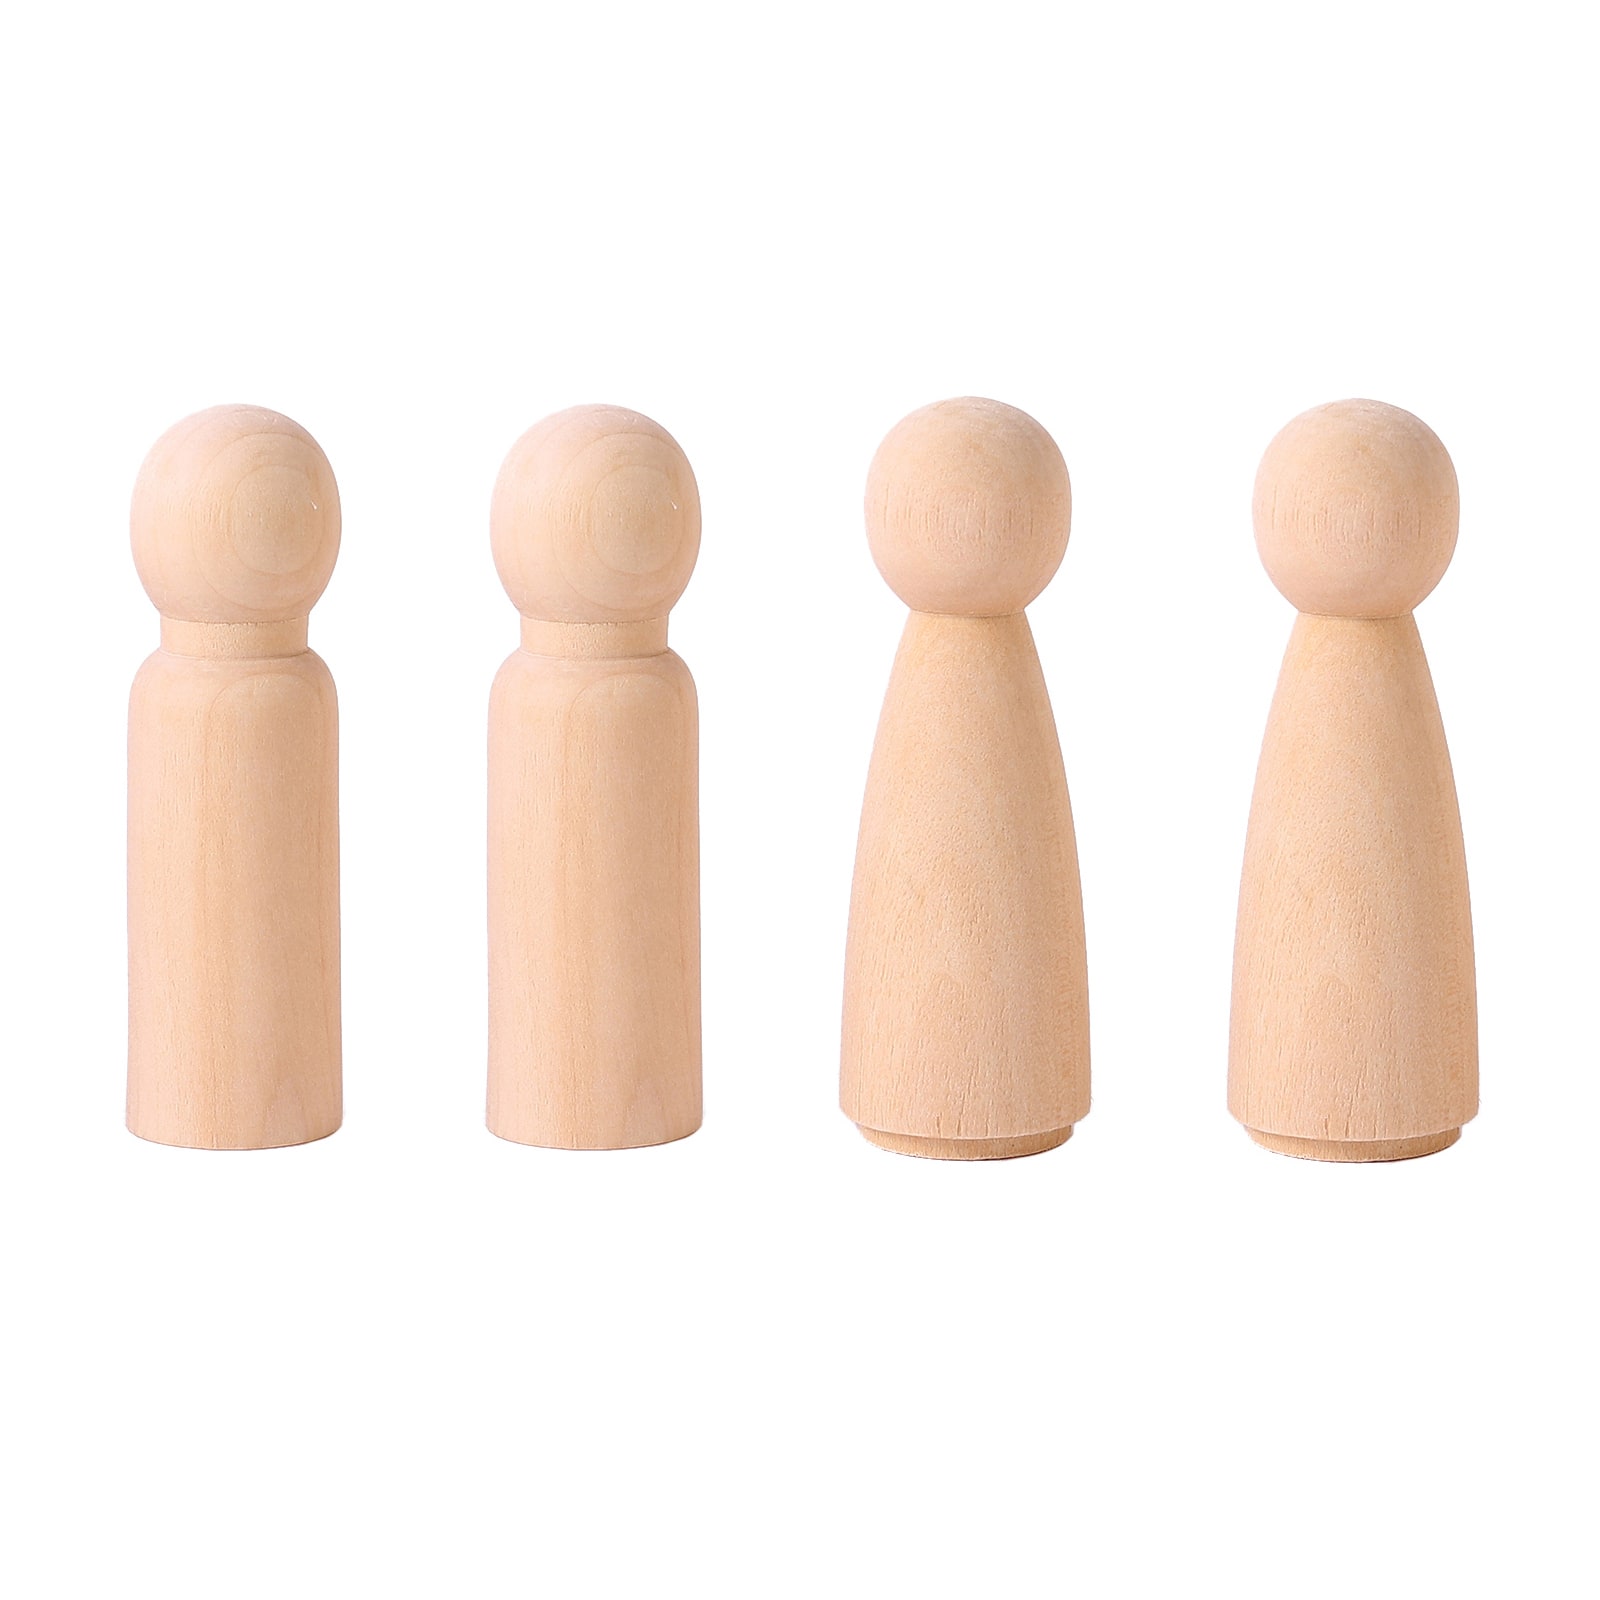 12 Packs: 4 ct. (48 total) Mixed Peg People by Creatology&#x2122;